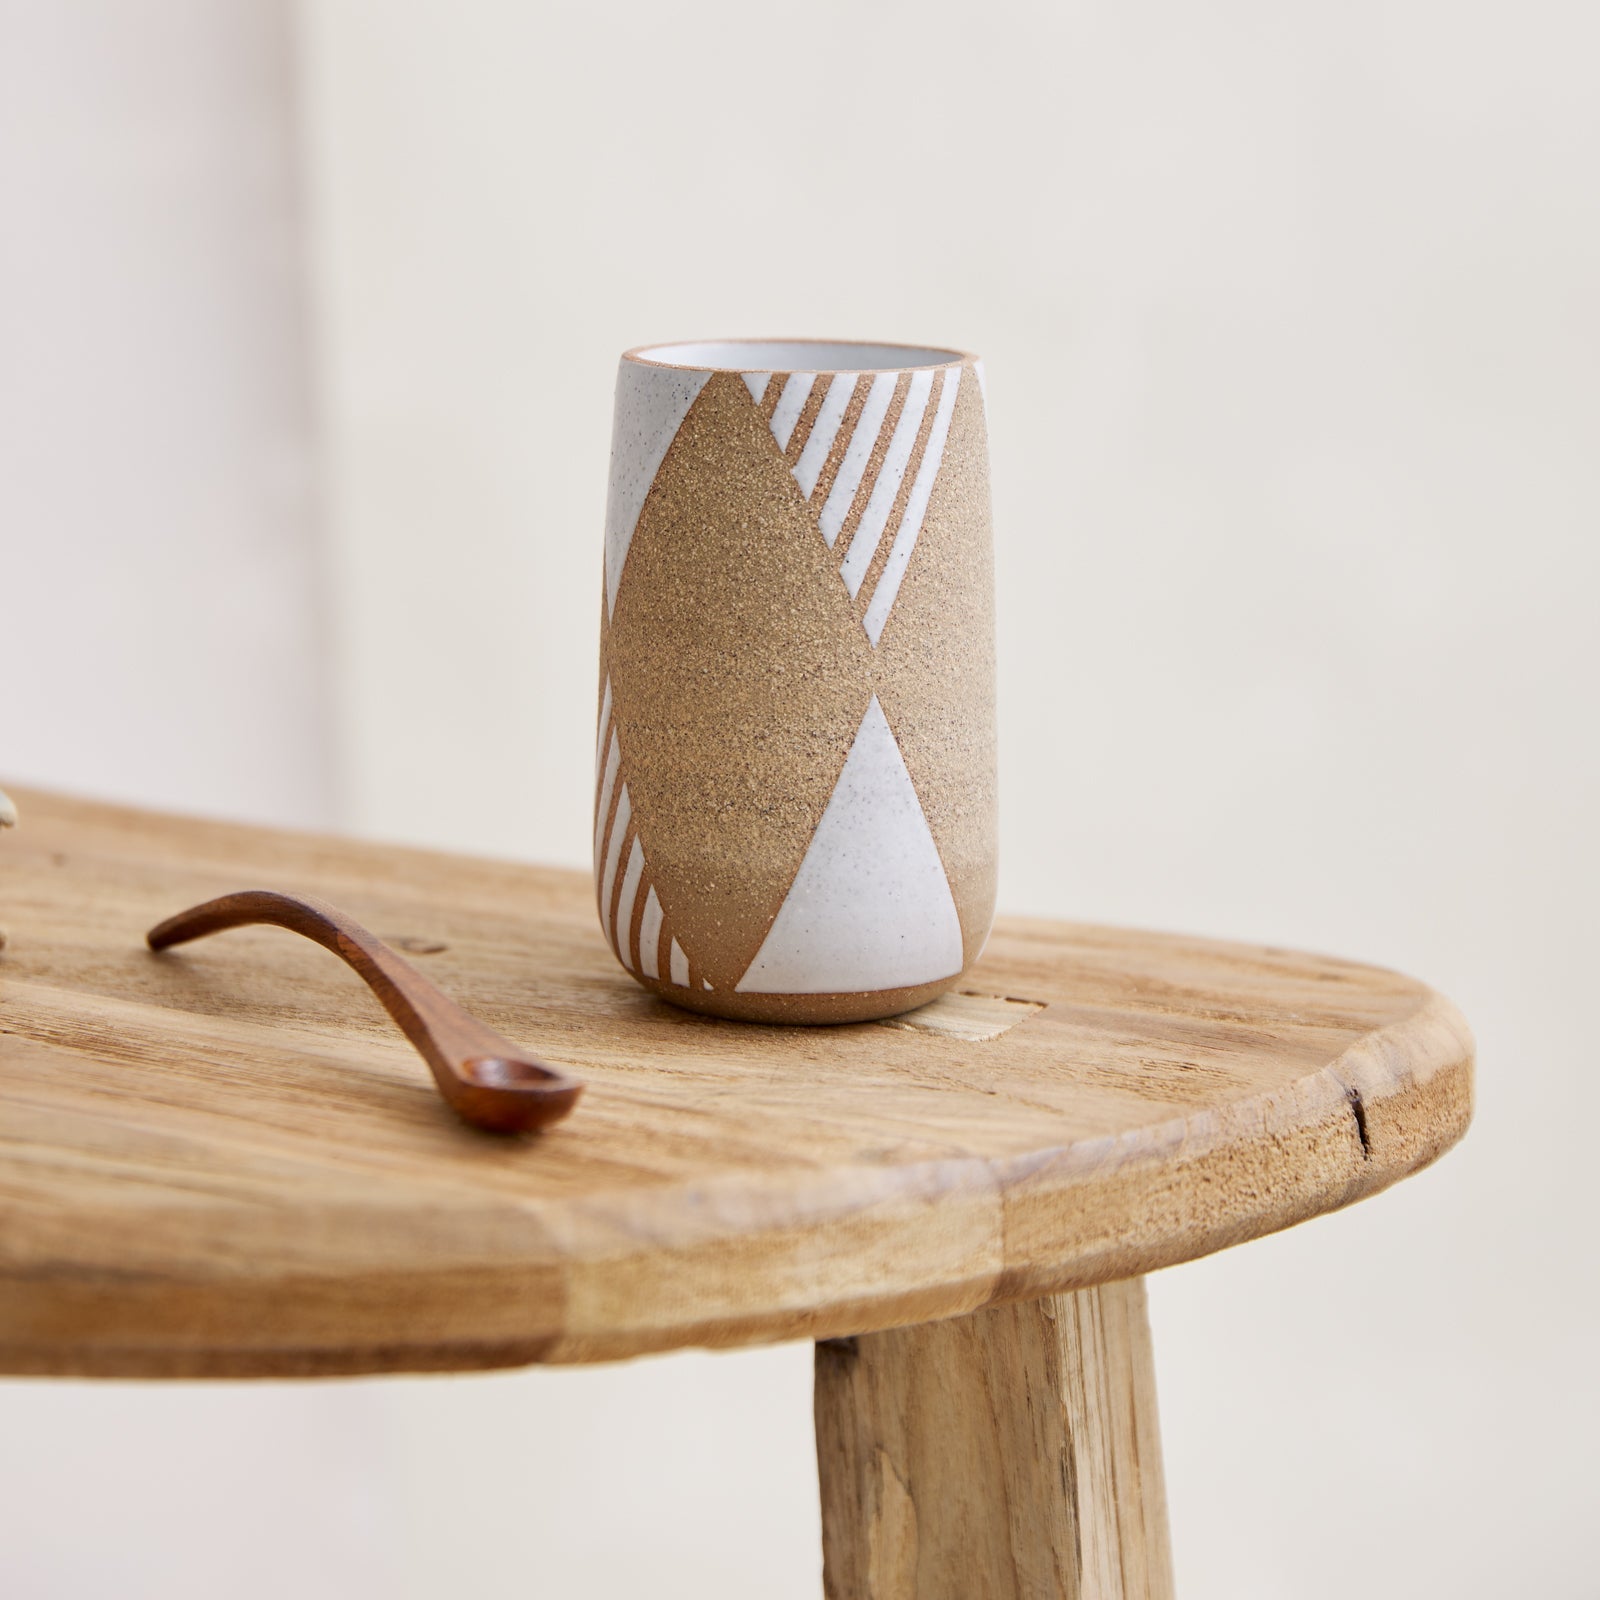  A front view of the Geometric Handmade Ceramic Mini Vase in natural and white glaze. The handmade vase has a geometric design and a tapered opening. The ceramic vase sits on a wooden side table.